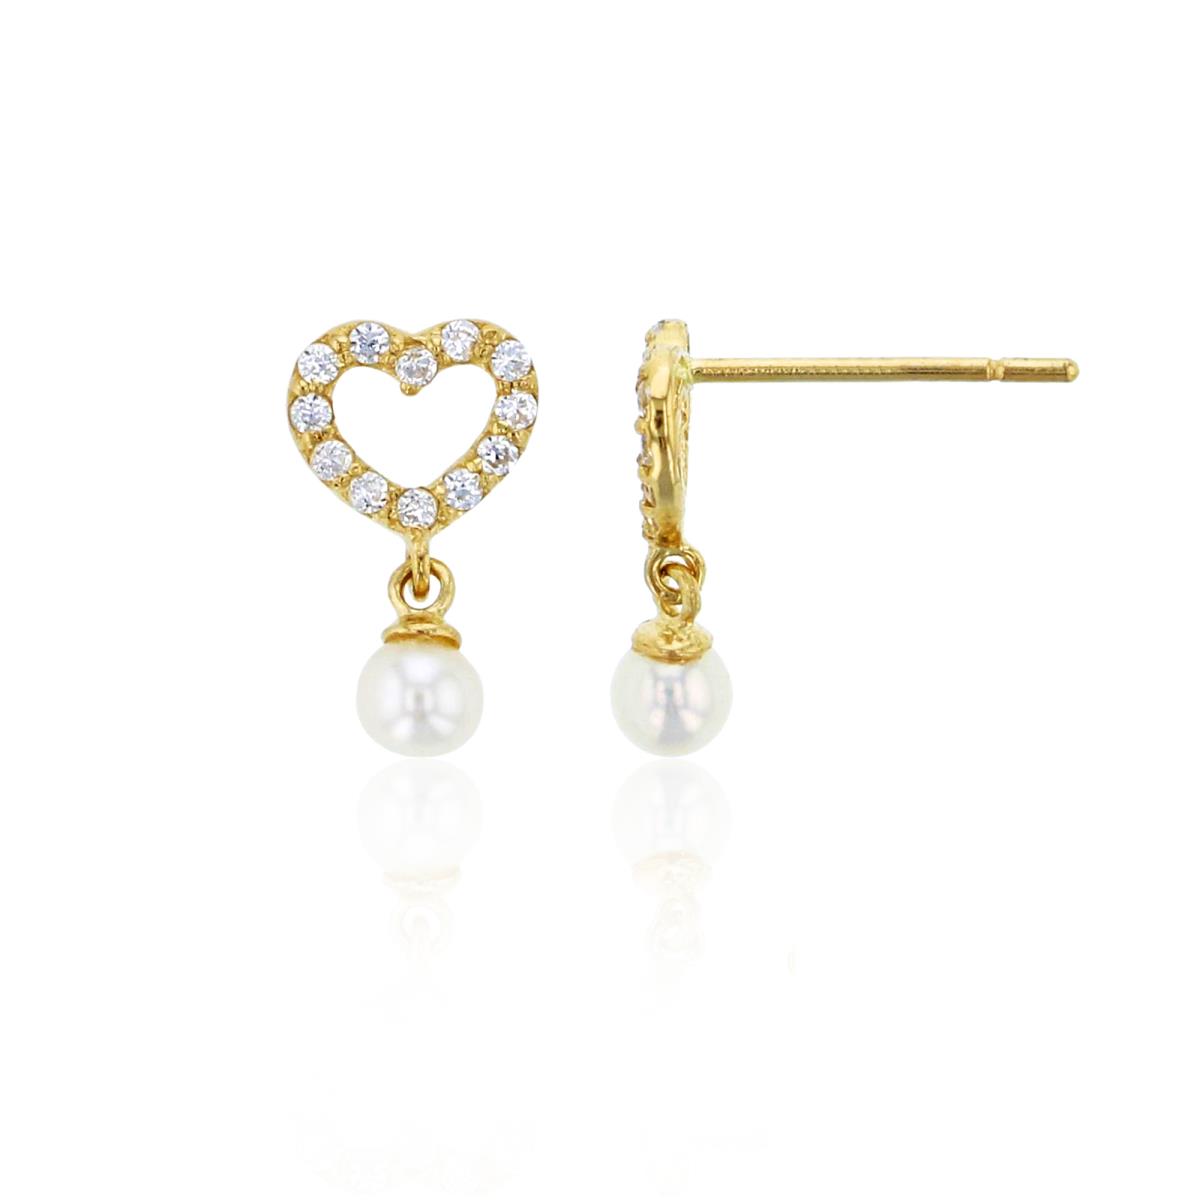 14K Yellow Gold Pave White Swarovski Zirconia Open Heart with 3mm Fresh Water Pearl Drop Earring